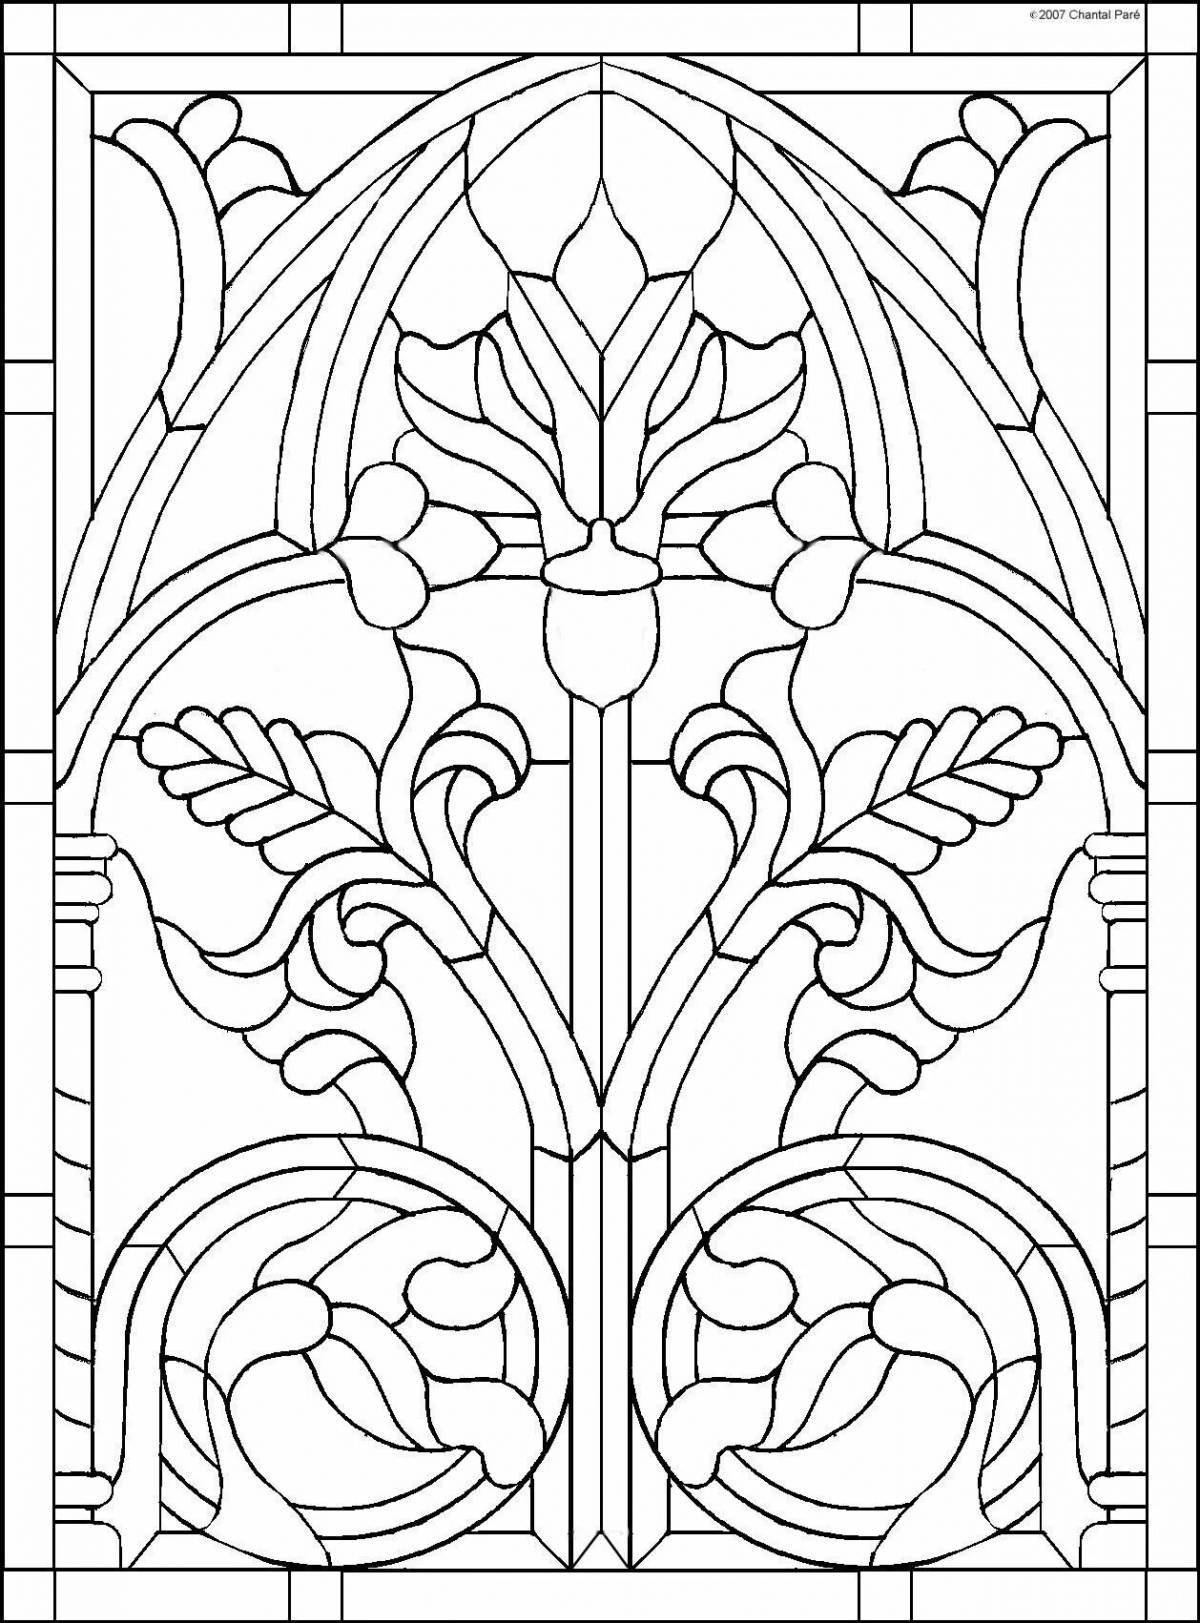 Royal stained glass coloring